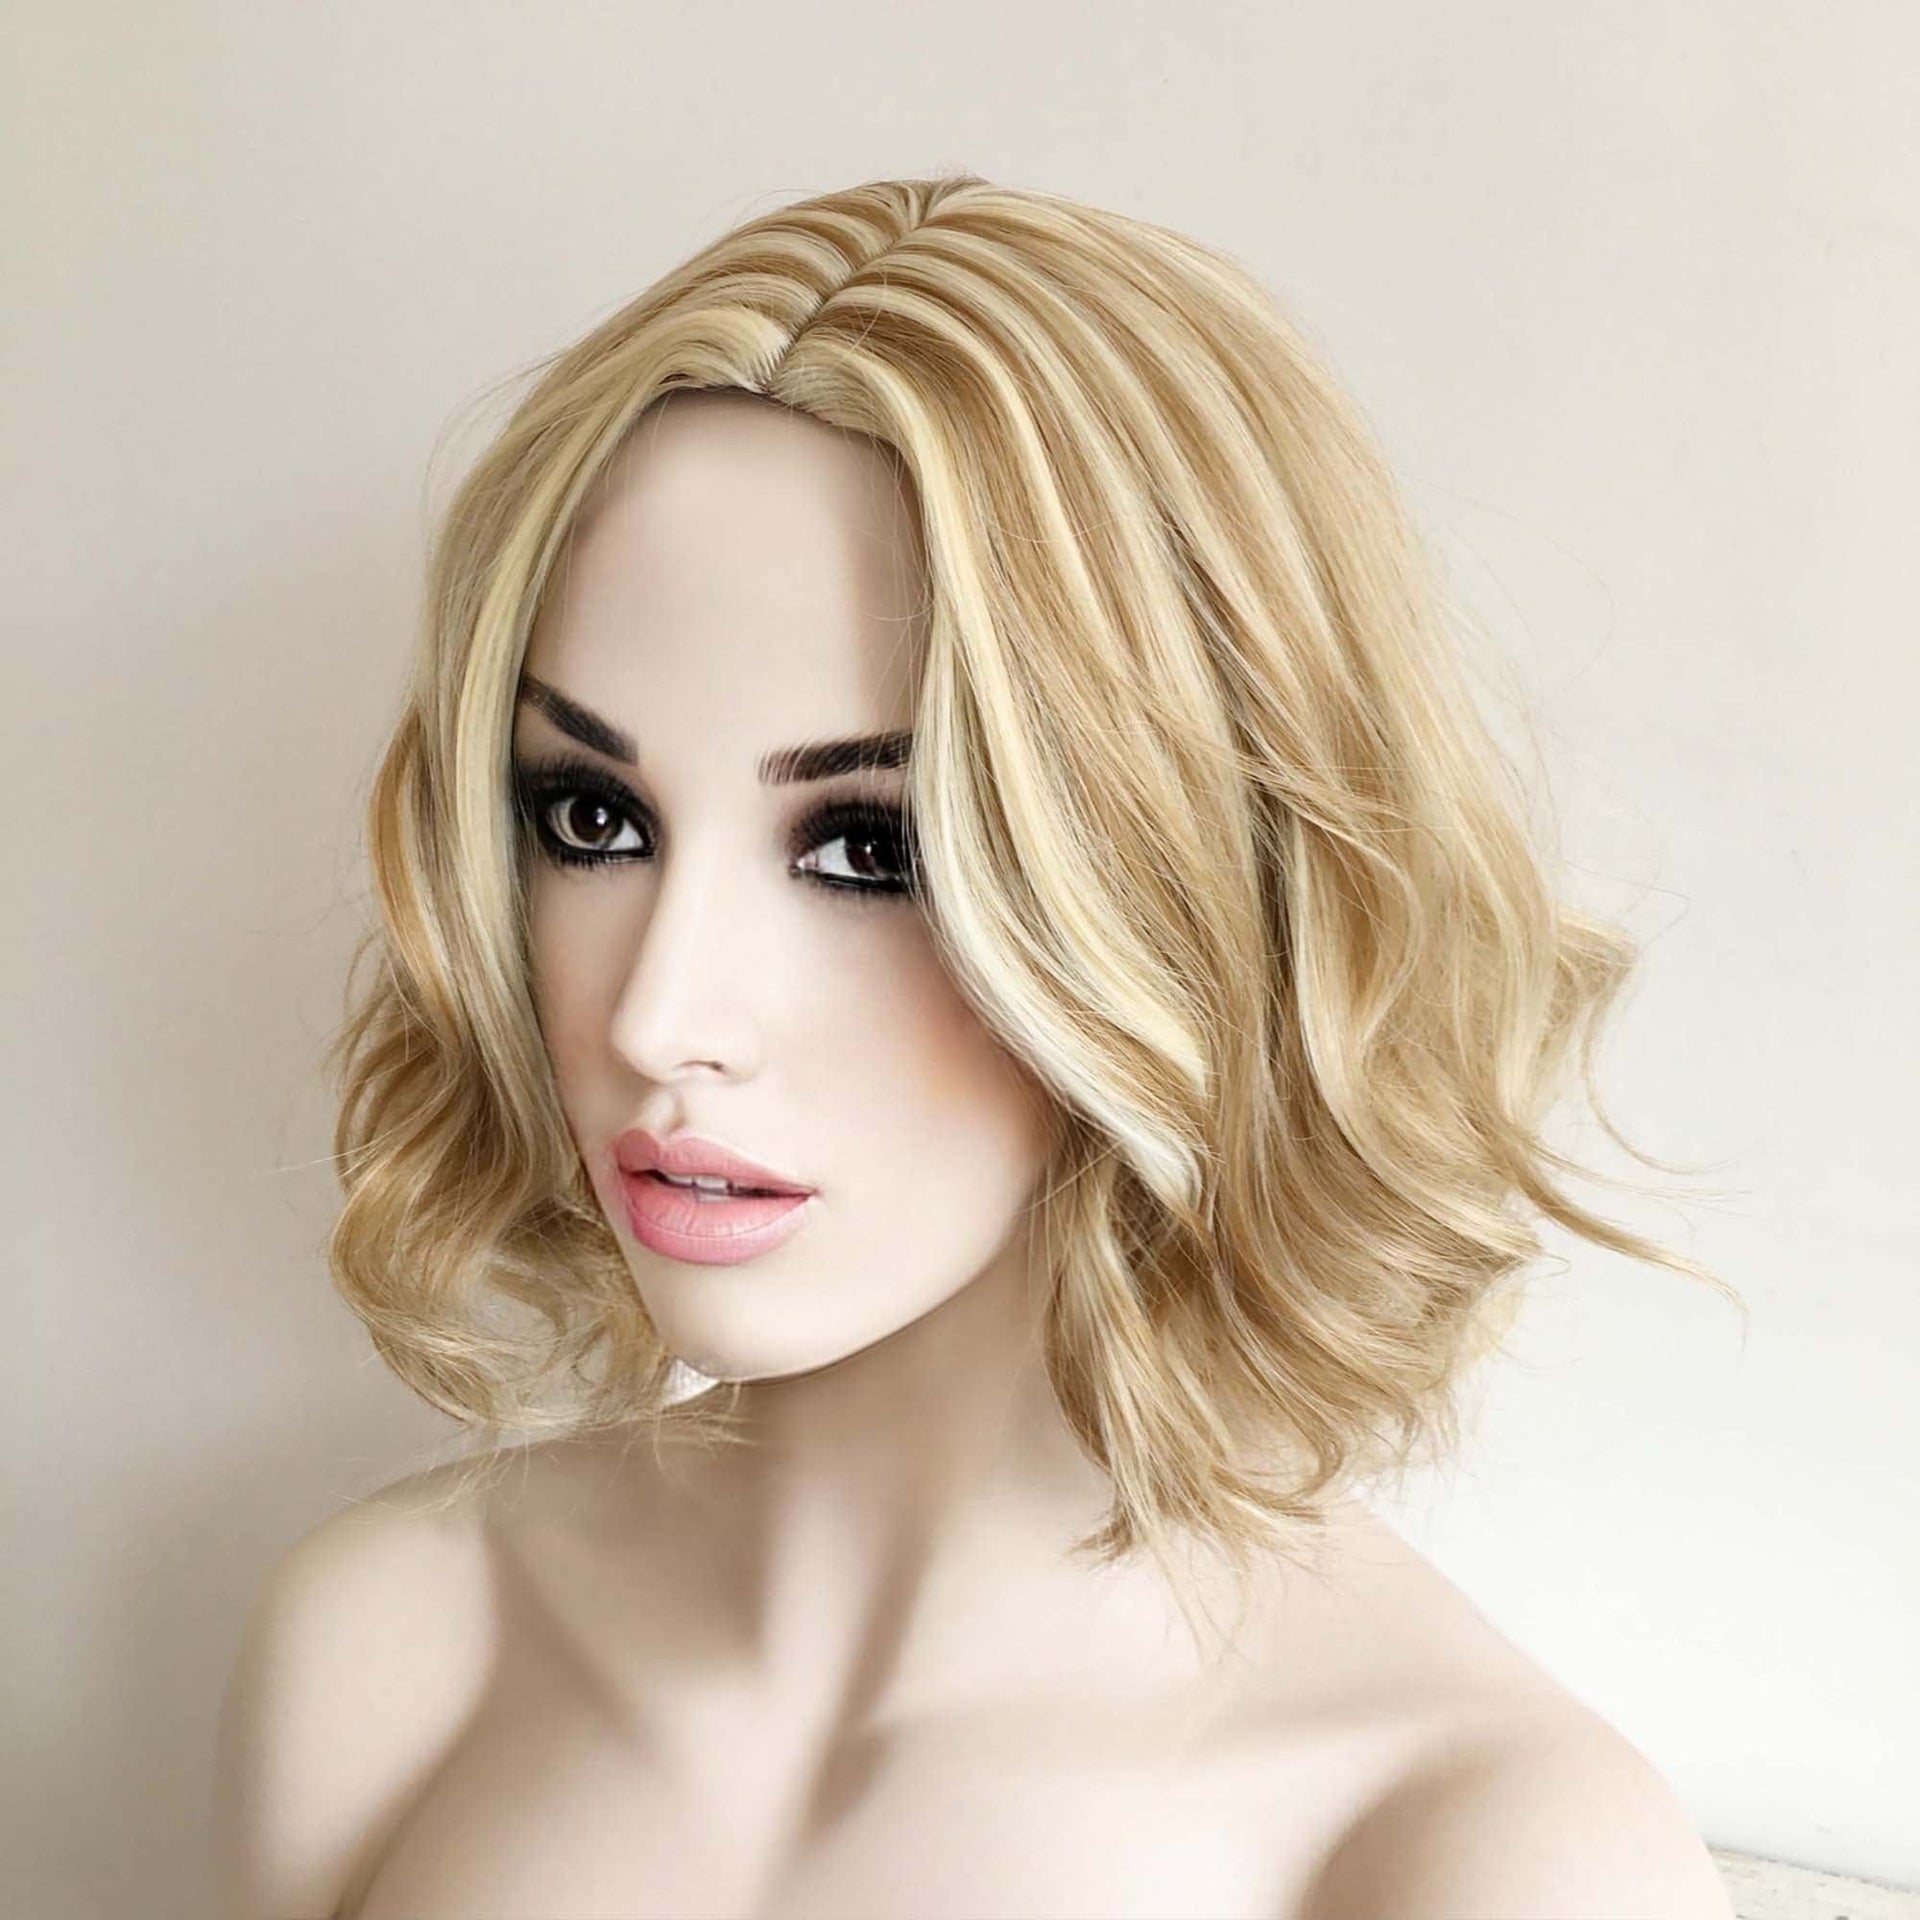 nevermindyrhead Women Light Toffee Blonde Ombre Short Curly Bob Side Part Wig